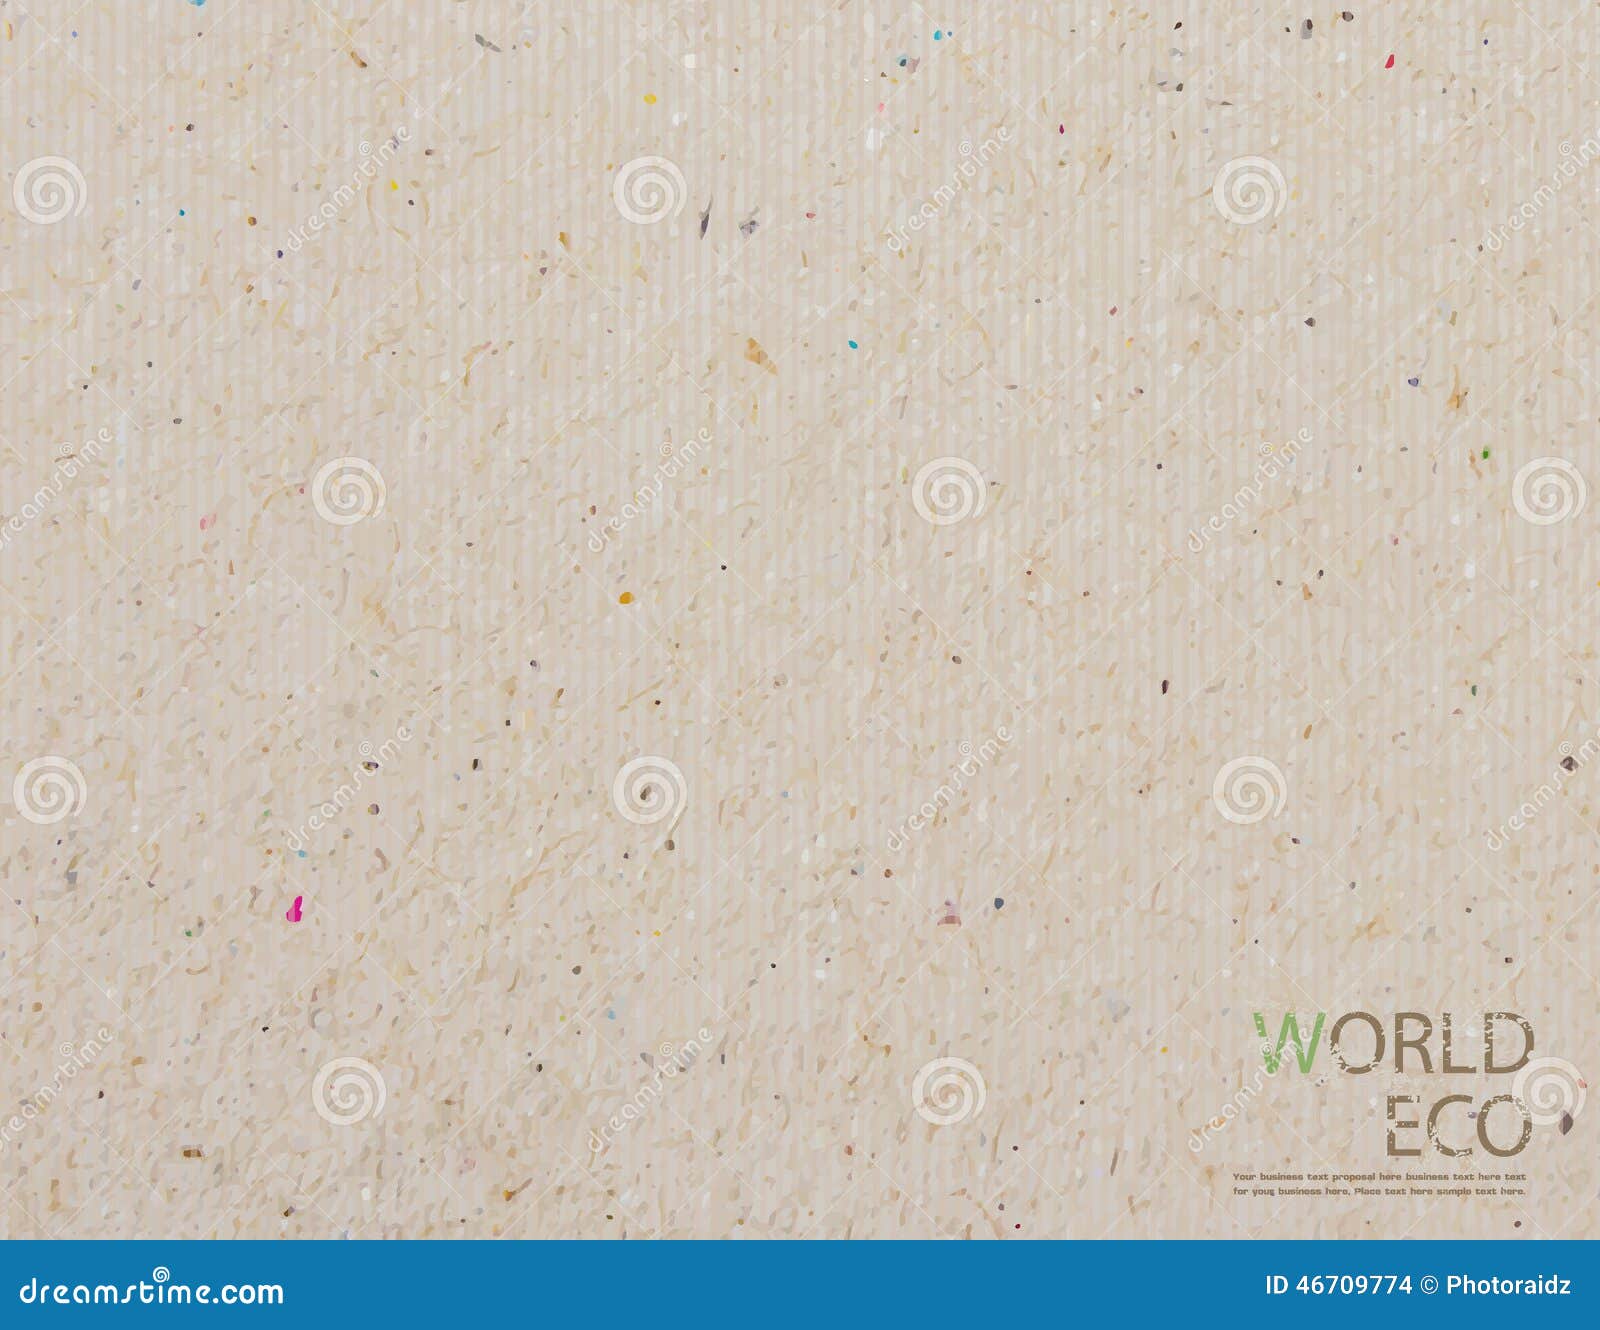 world map recycled paper craft stick background